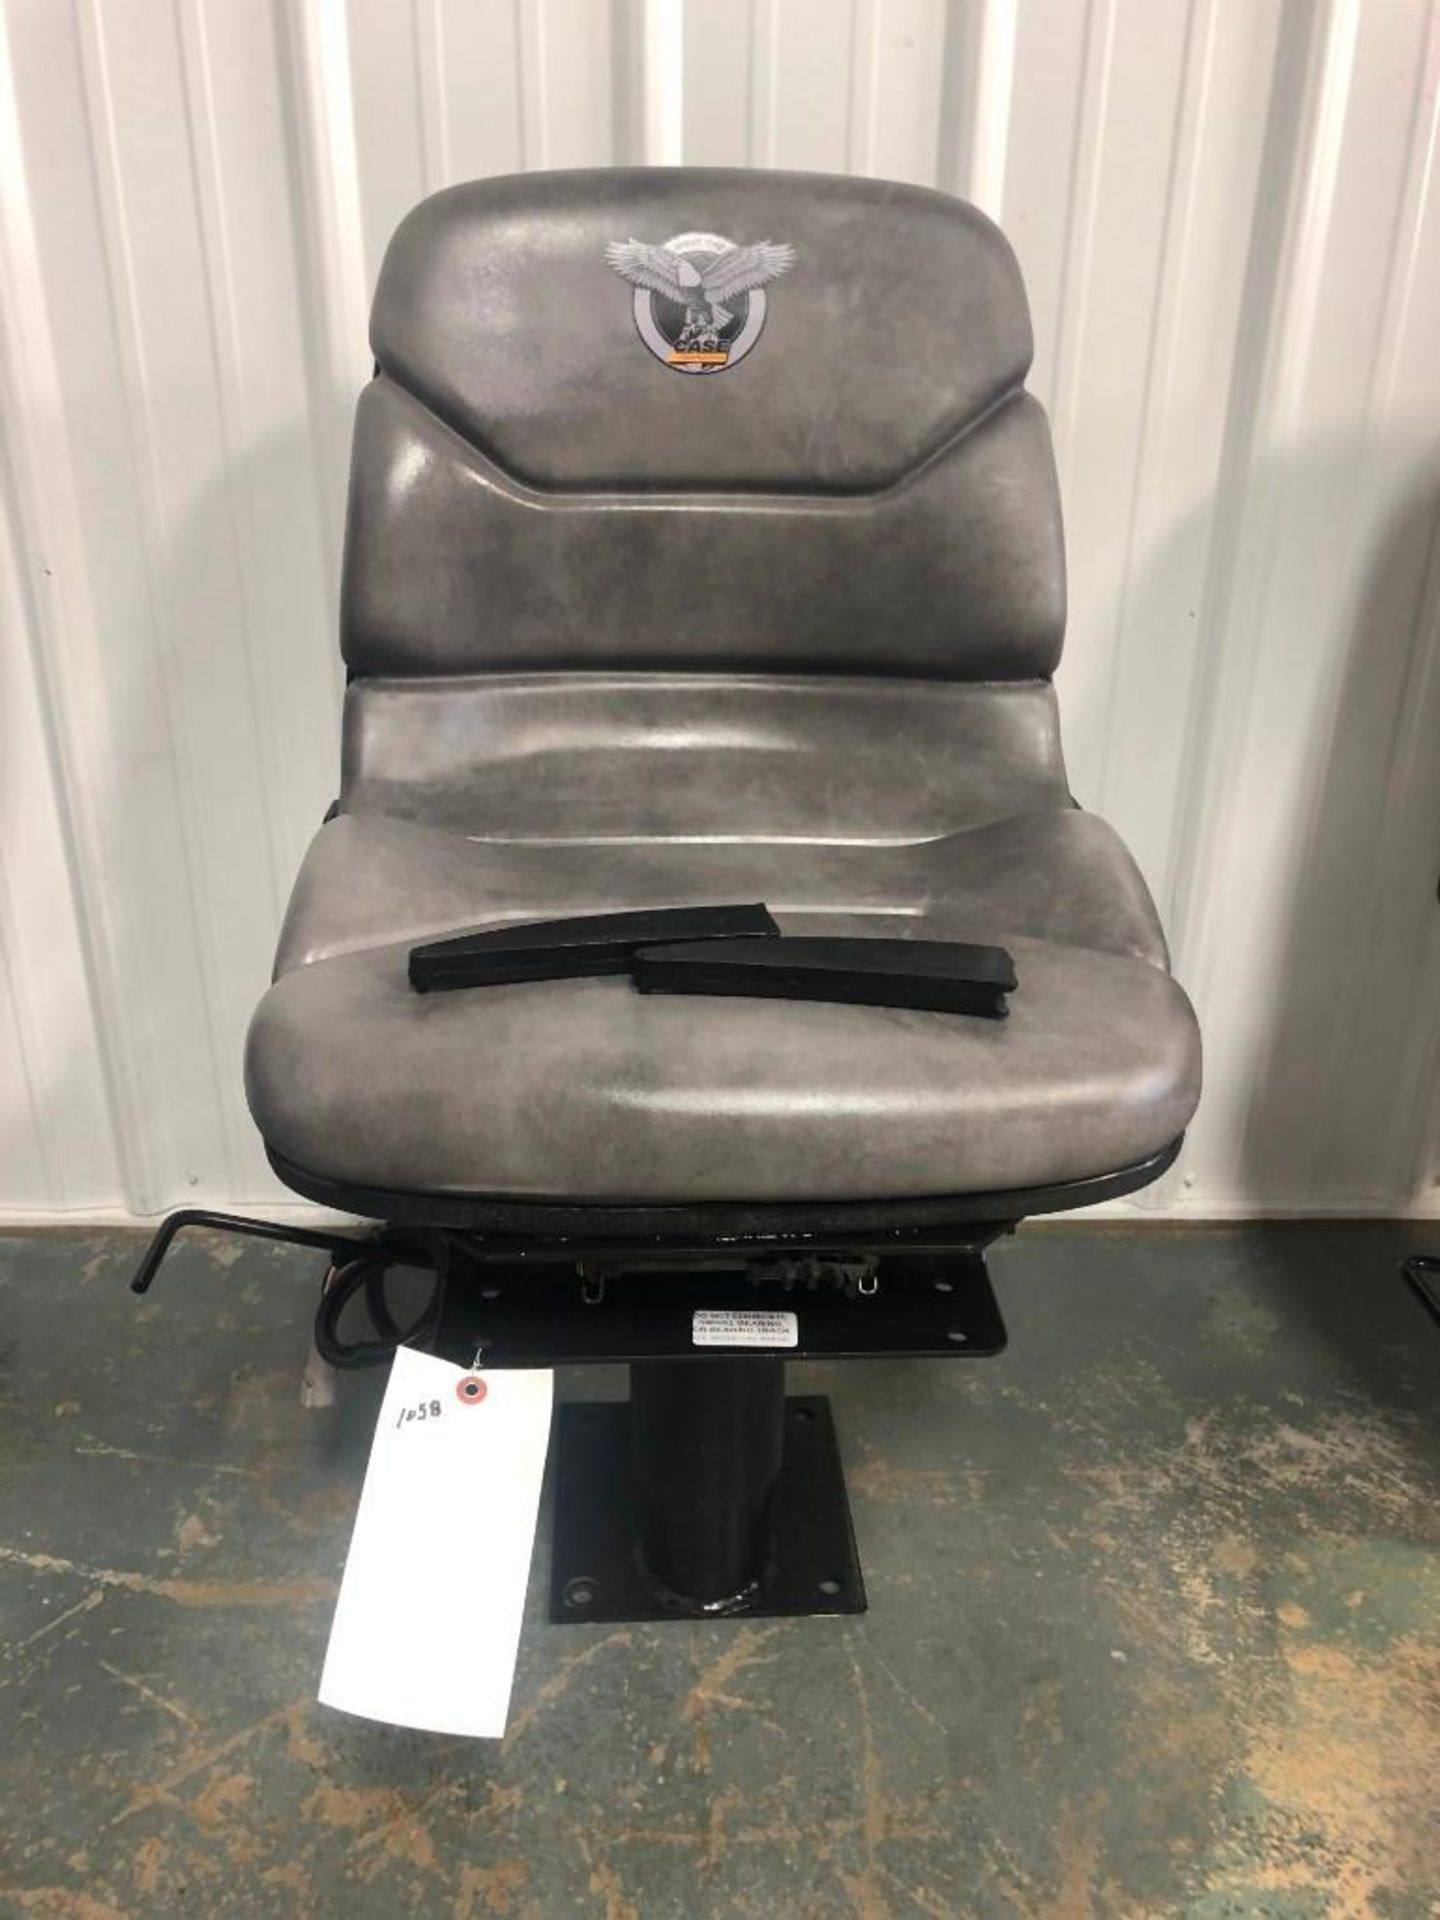 Case Backhoe Seat. Located at 301 E Henry Street, Mt. Pleasant, IA 52641.